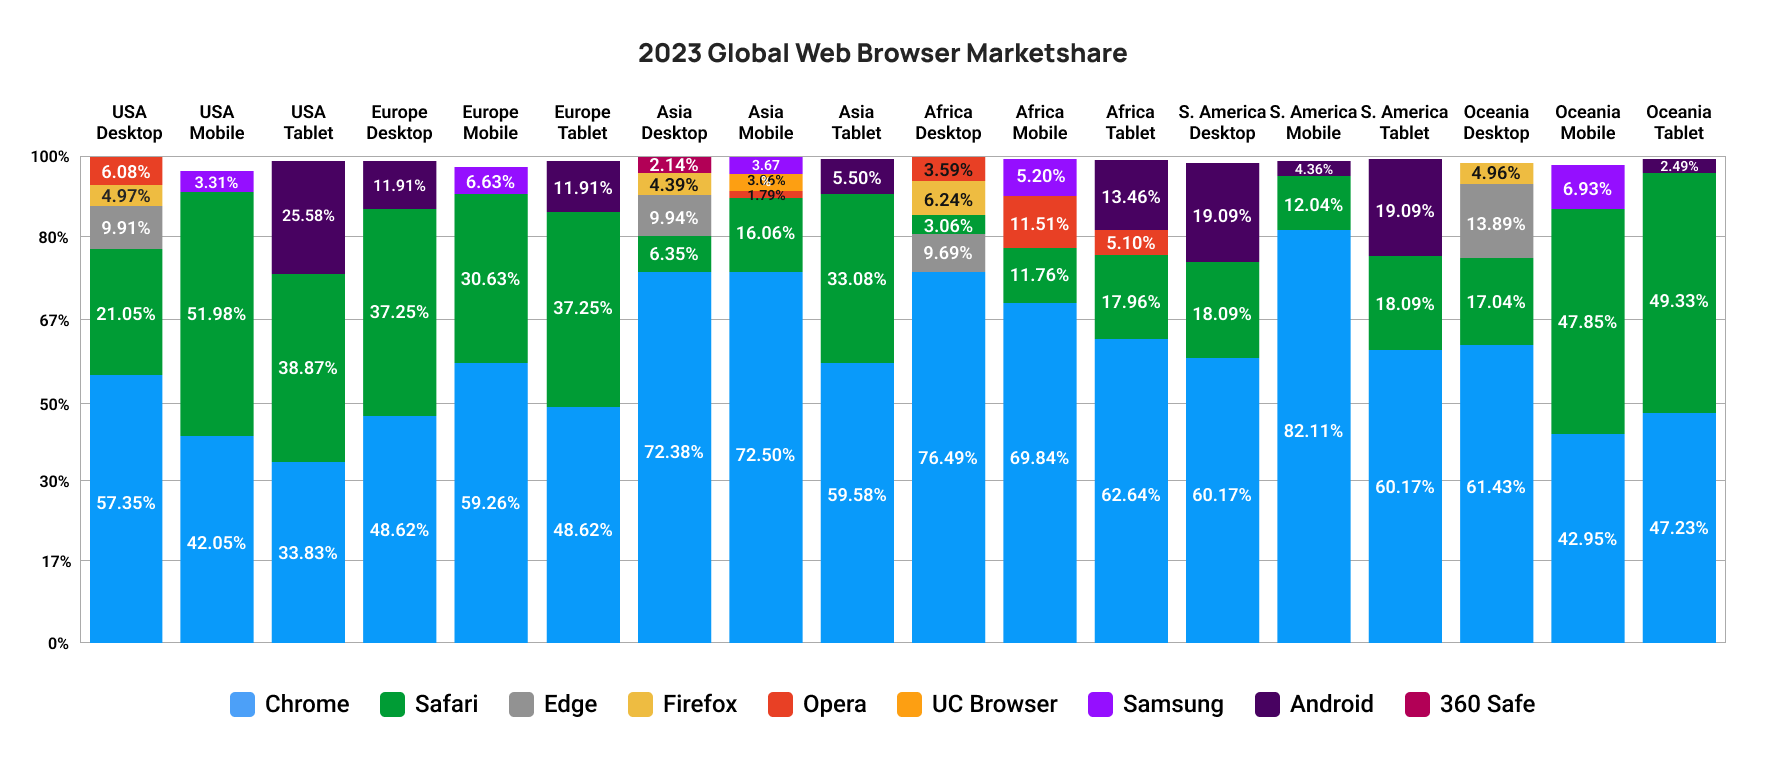 Stacked bar chart showing the global market share of desktop, mobile, and tablet web browsers in 6 countries.